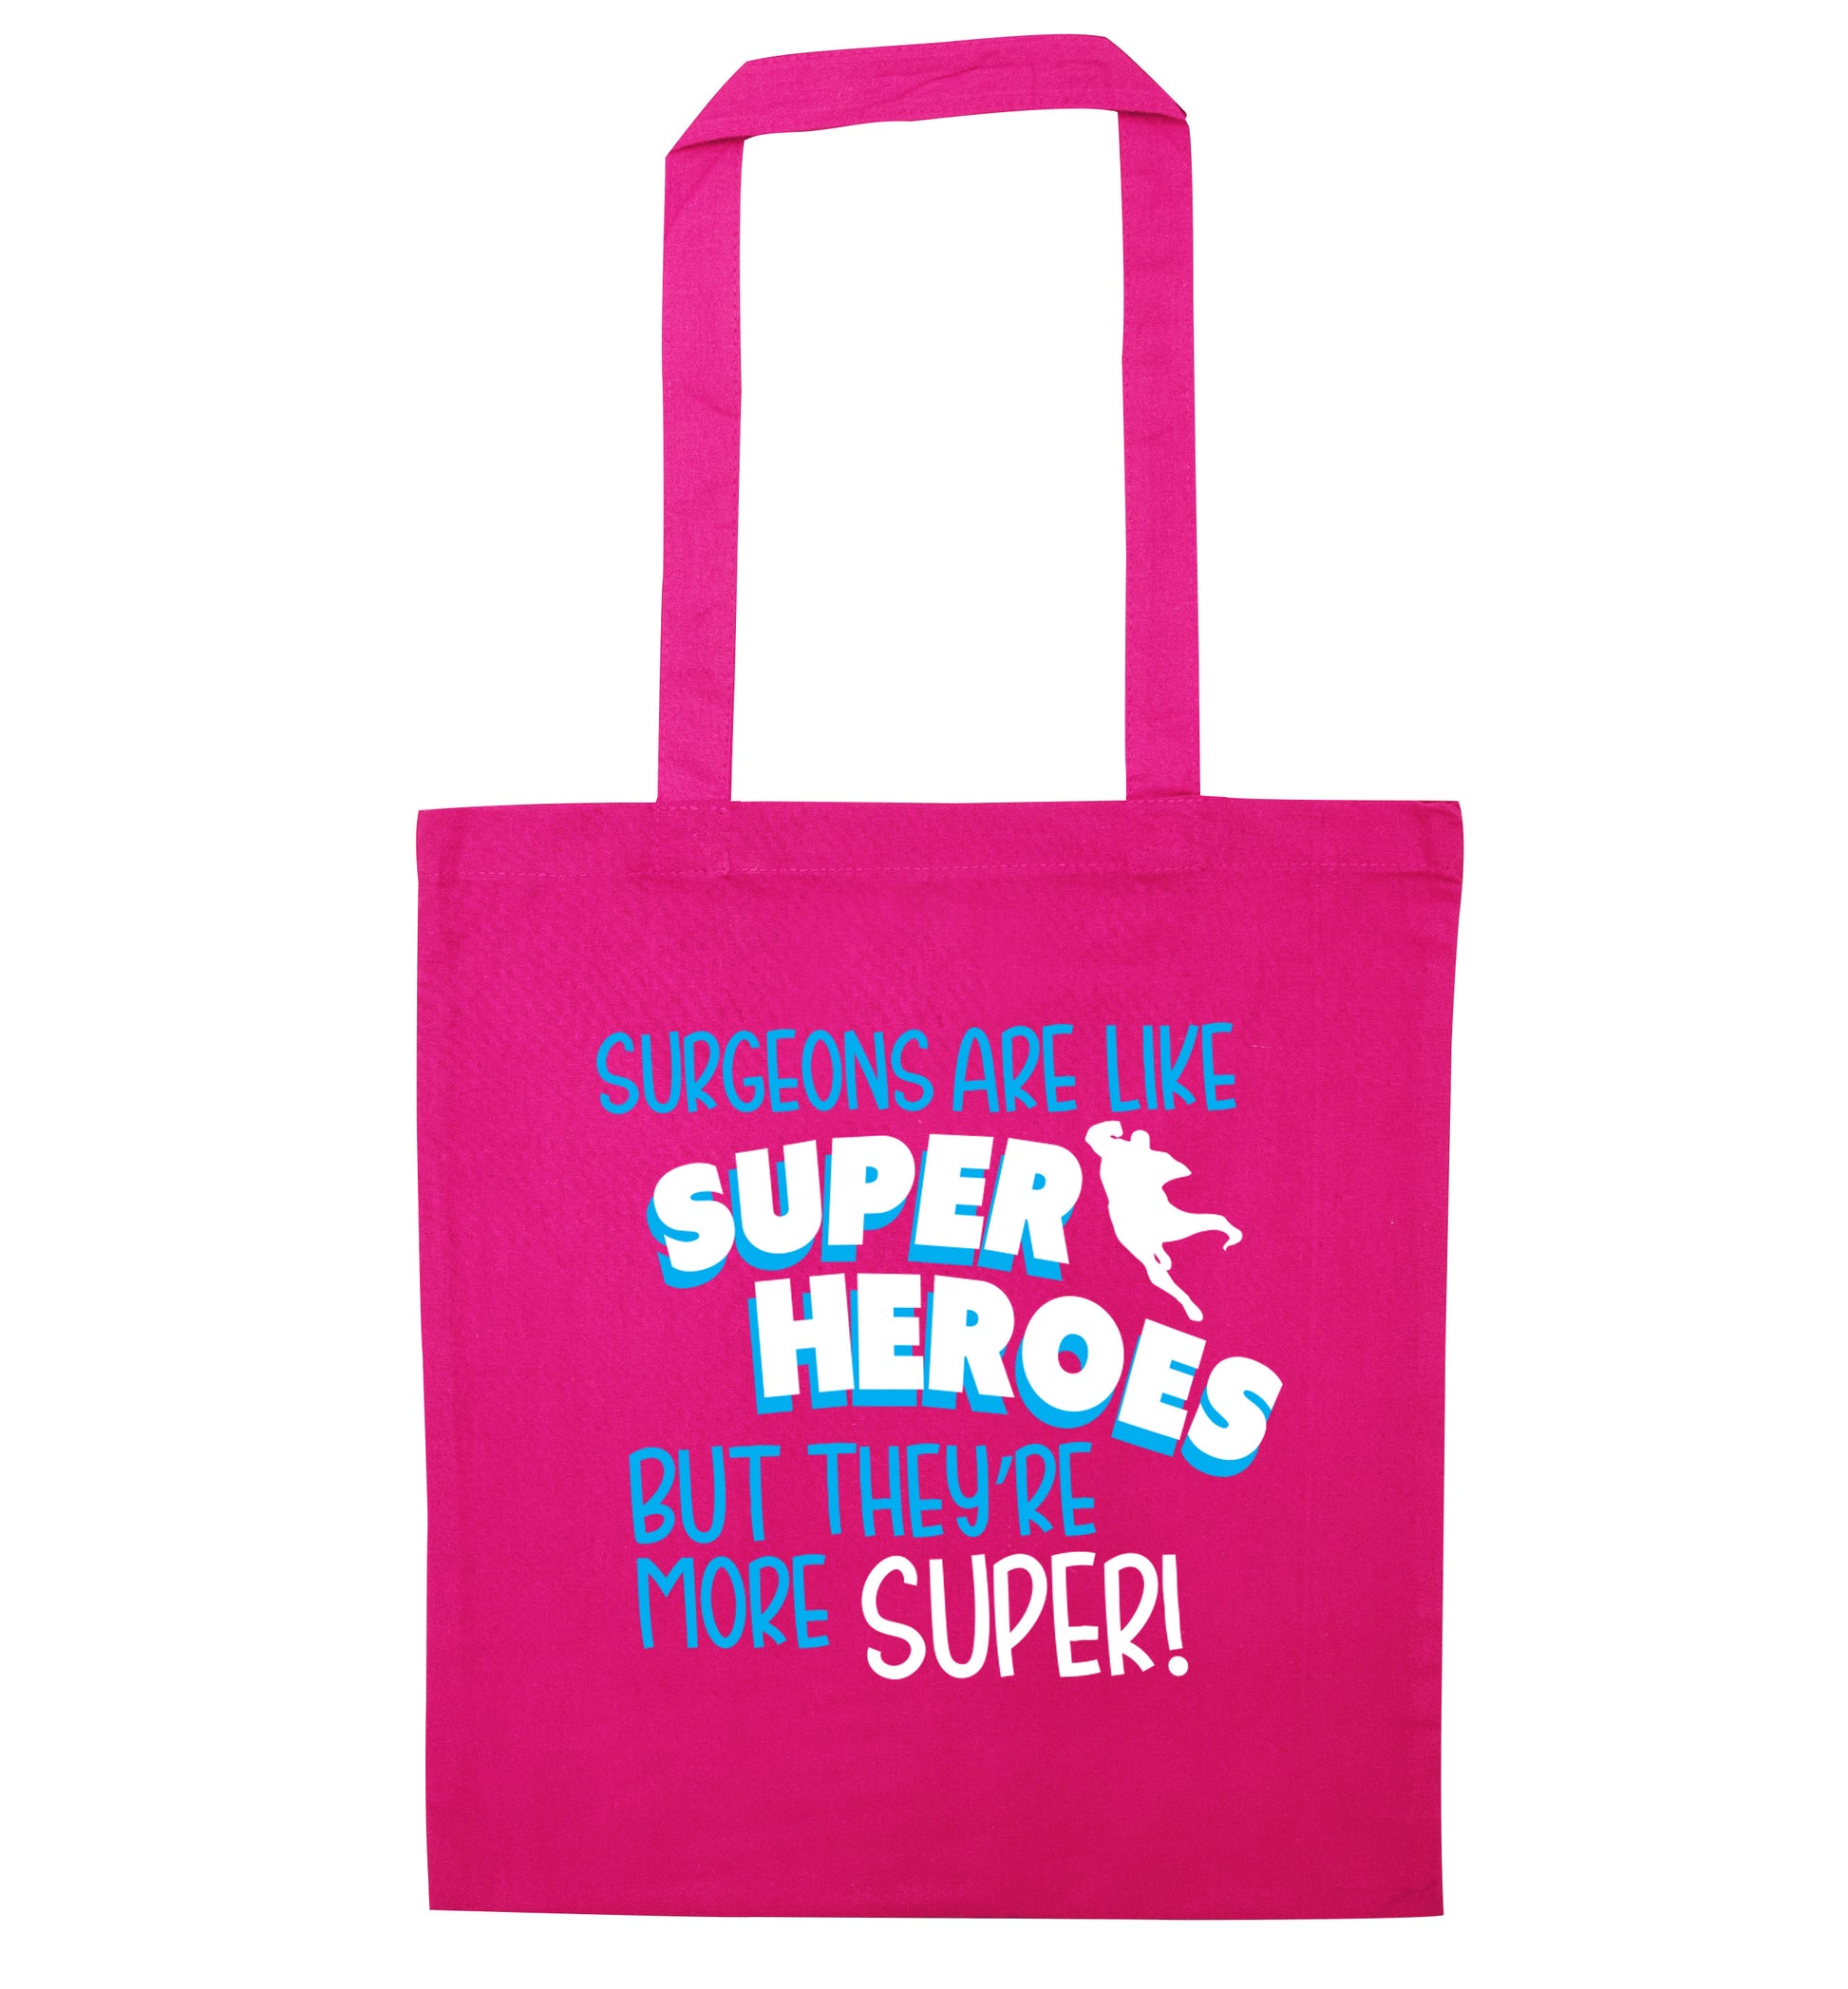 Surgeons are like superheros but they're more super pink tote bag